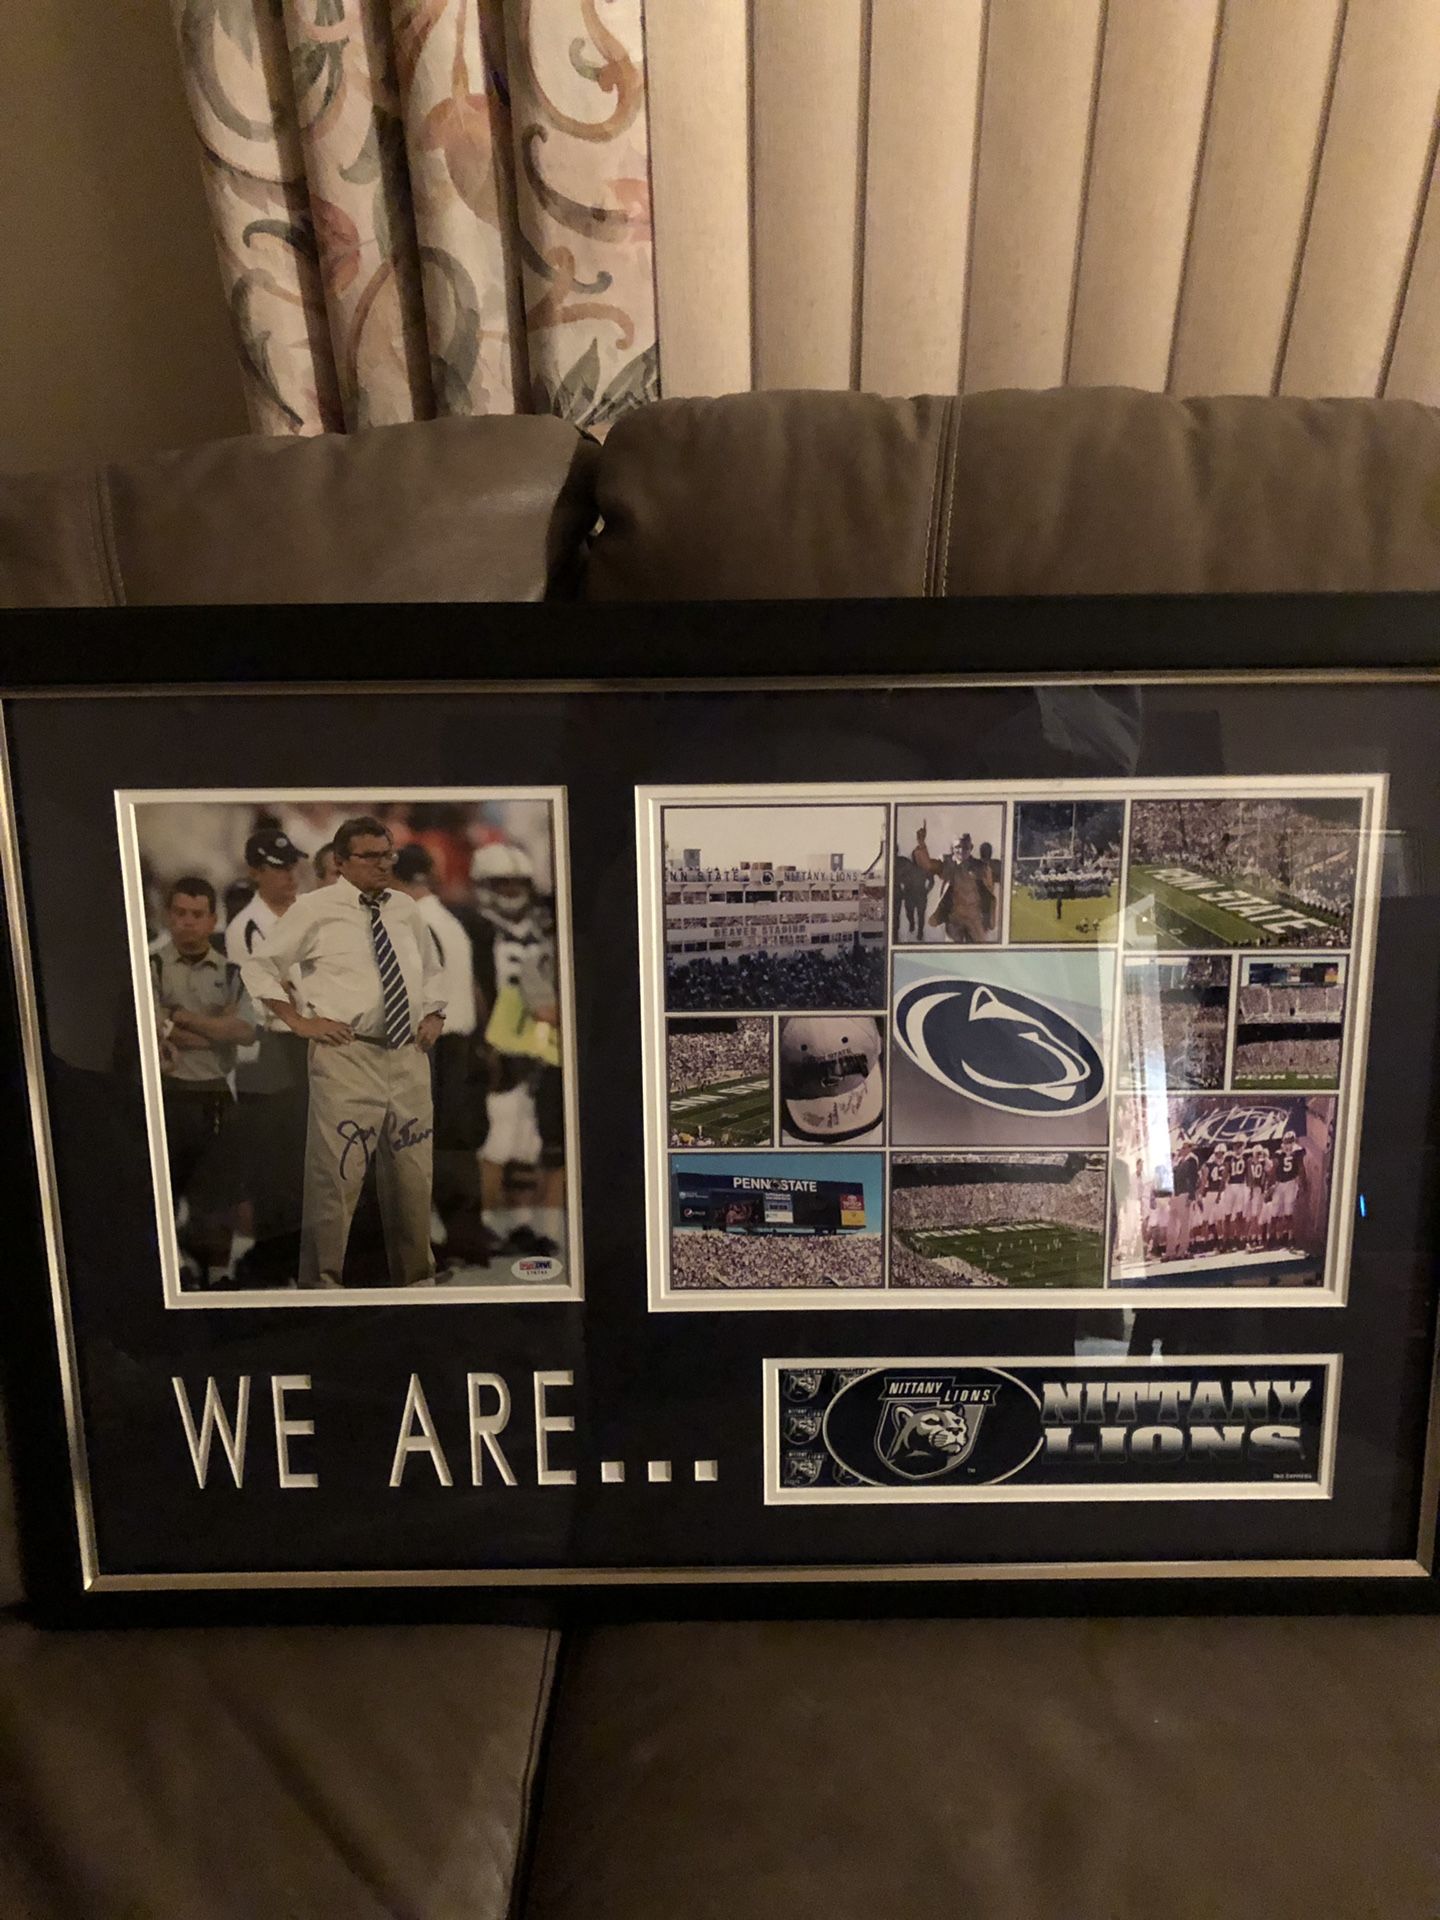 Autographed and Certified Joe Paterno “We Are Penn State” Football Collage, includes Photographed Stills of Beaver Valley, and the Penn State Bumper